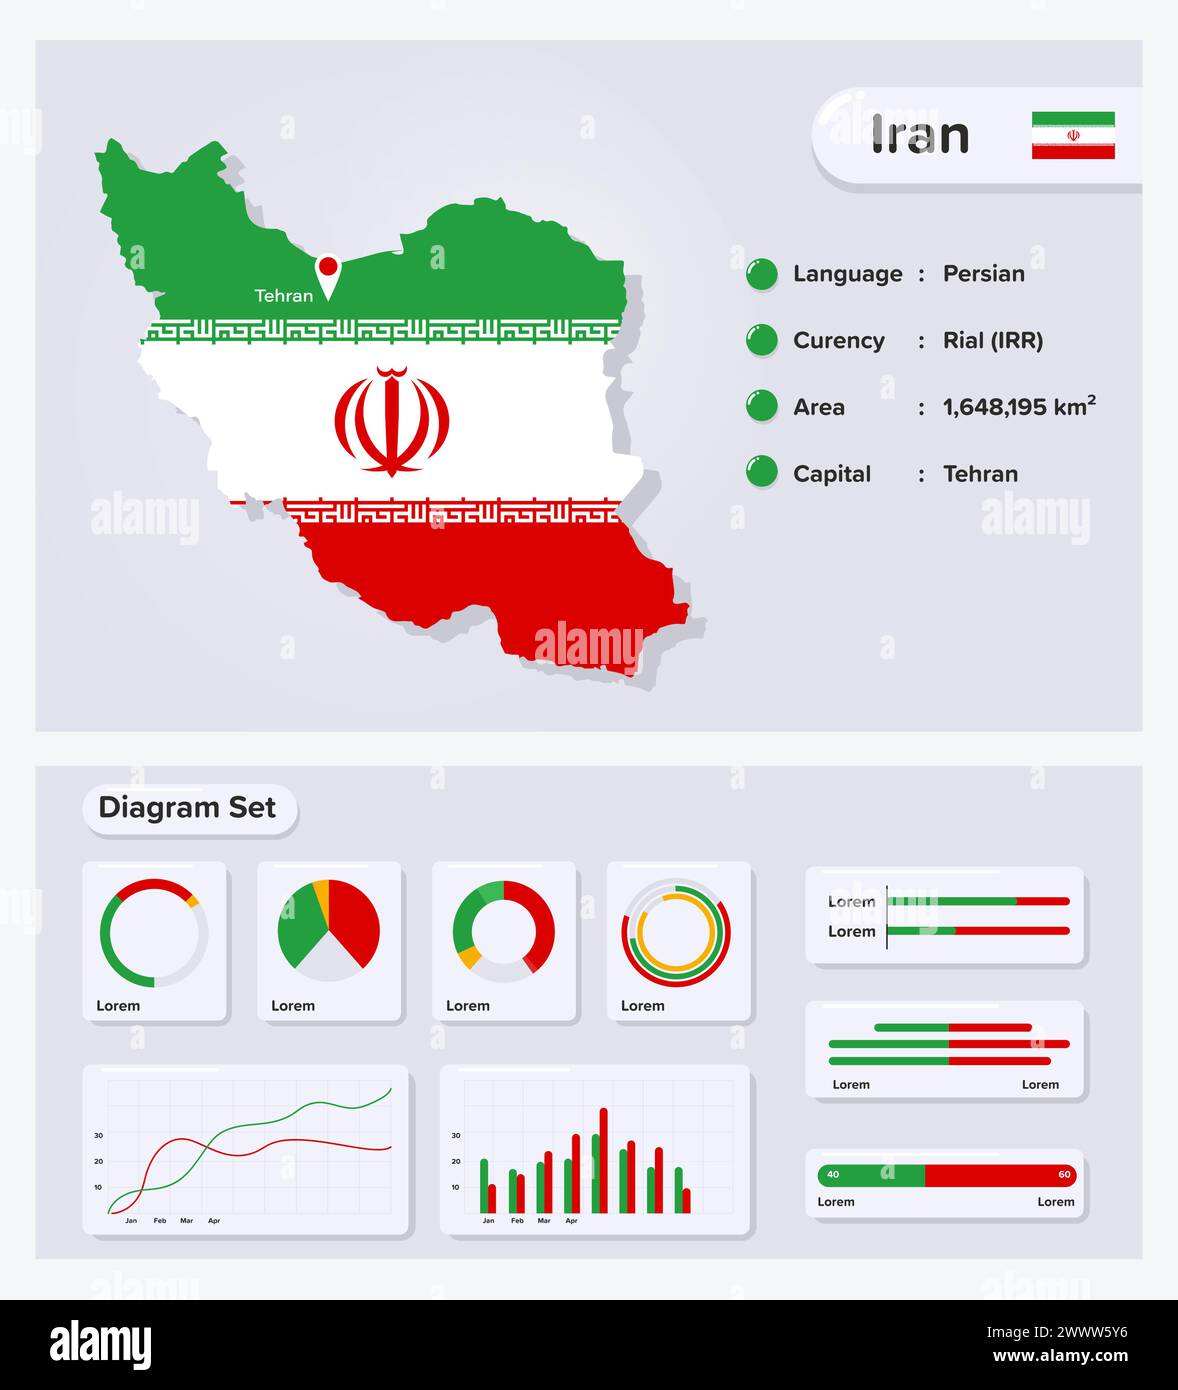 Iran Infographic Vector Illustration, Iran Statistical Data Element, Information Board With Flag Map, Iran Map Flag With Diagram Set Flat Design Stock Vector